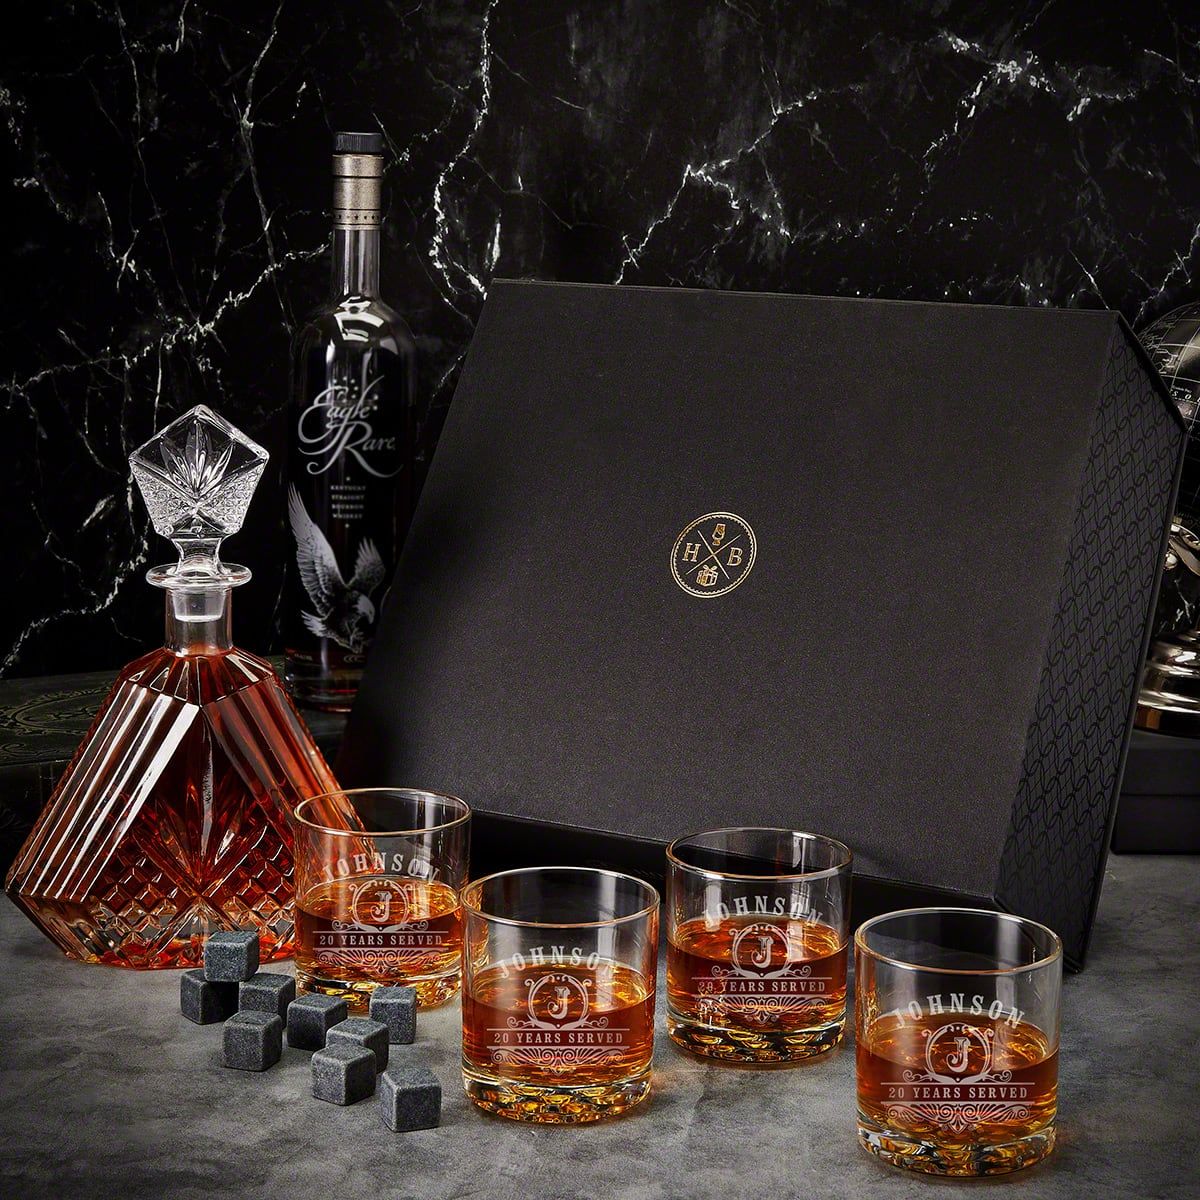 Engraved Crystal Decanter And Six Brandy Goblet Tray Set